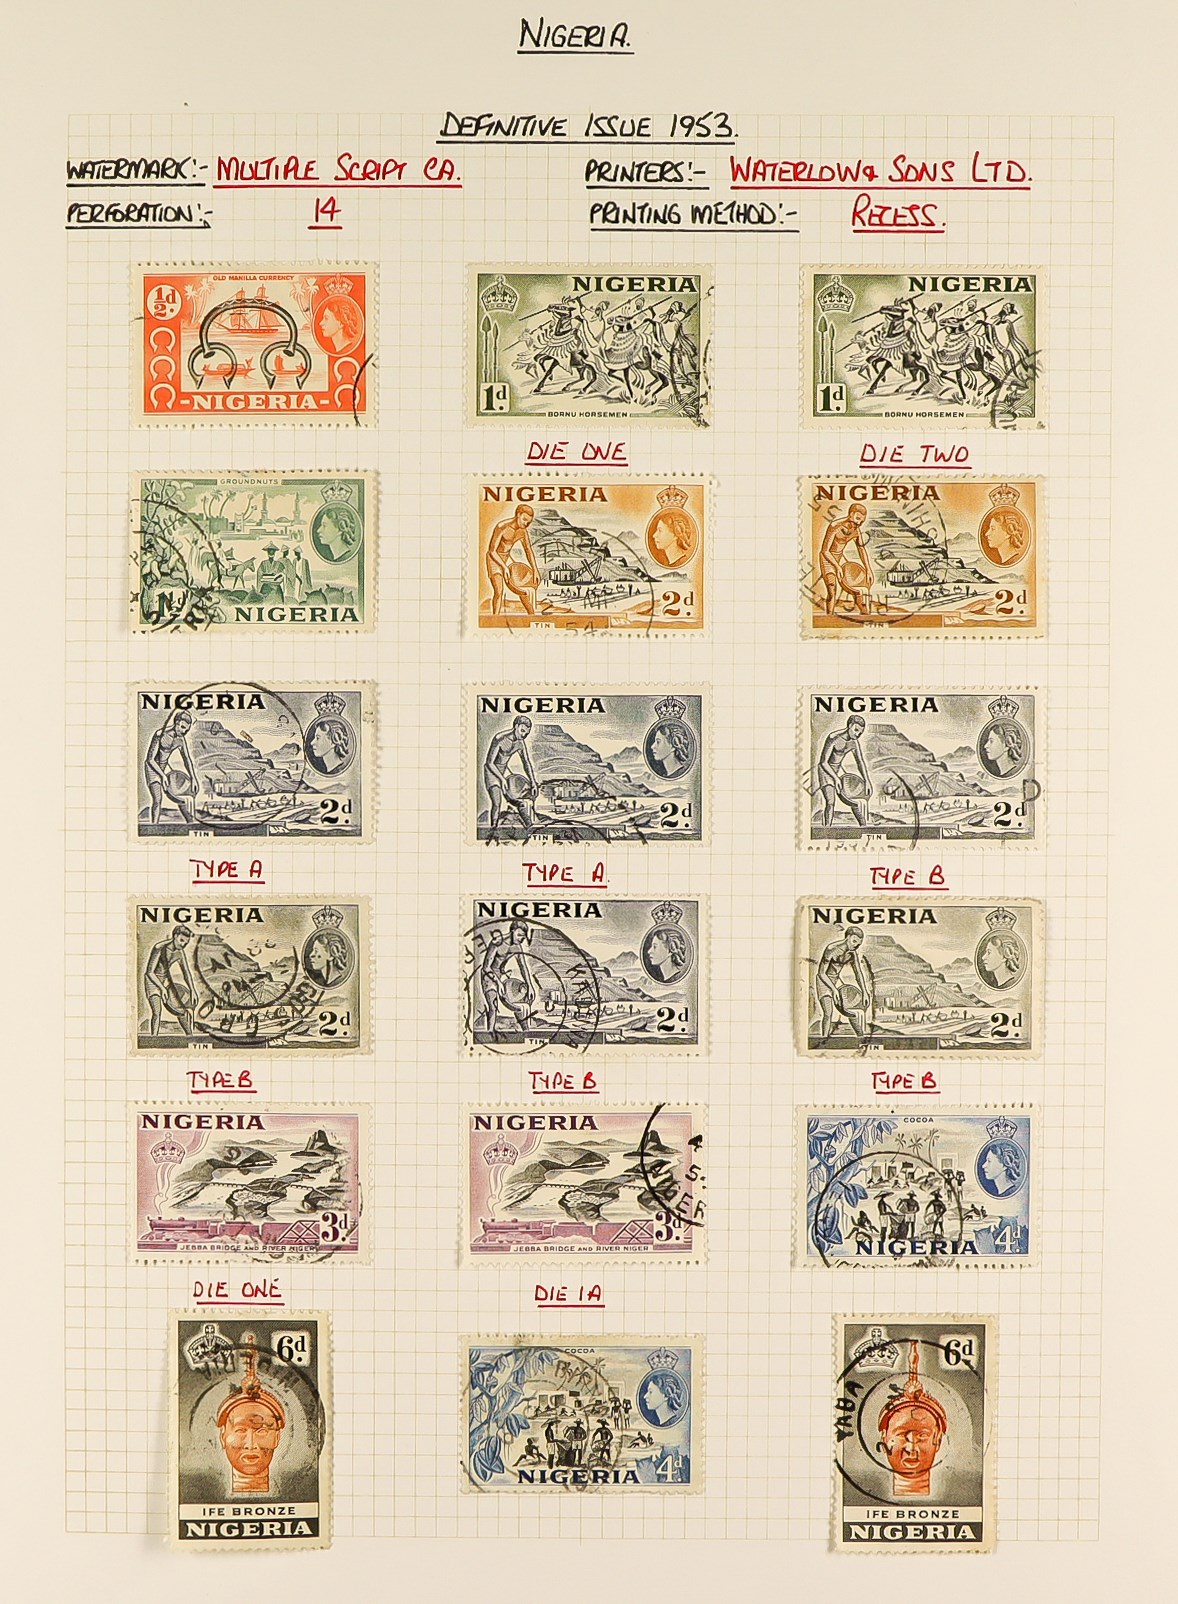 NIGERIA 1953 - 2008 EXTENSIVE USED COLLECTION in a well-filled album, of stamps & miniature